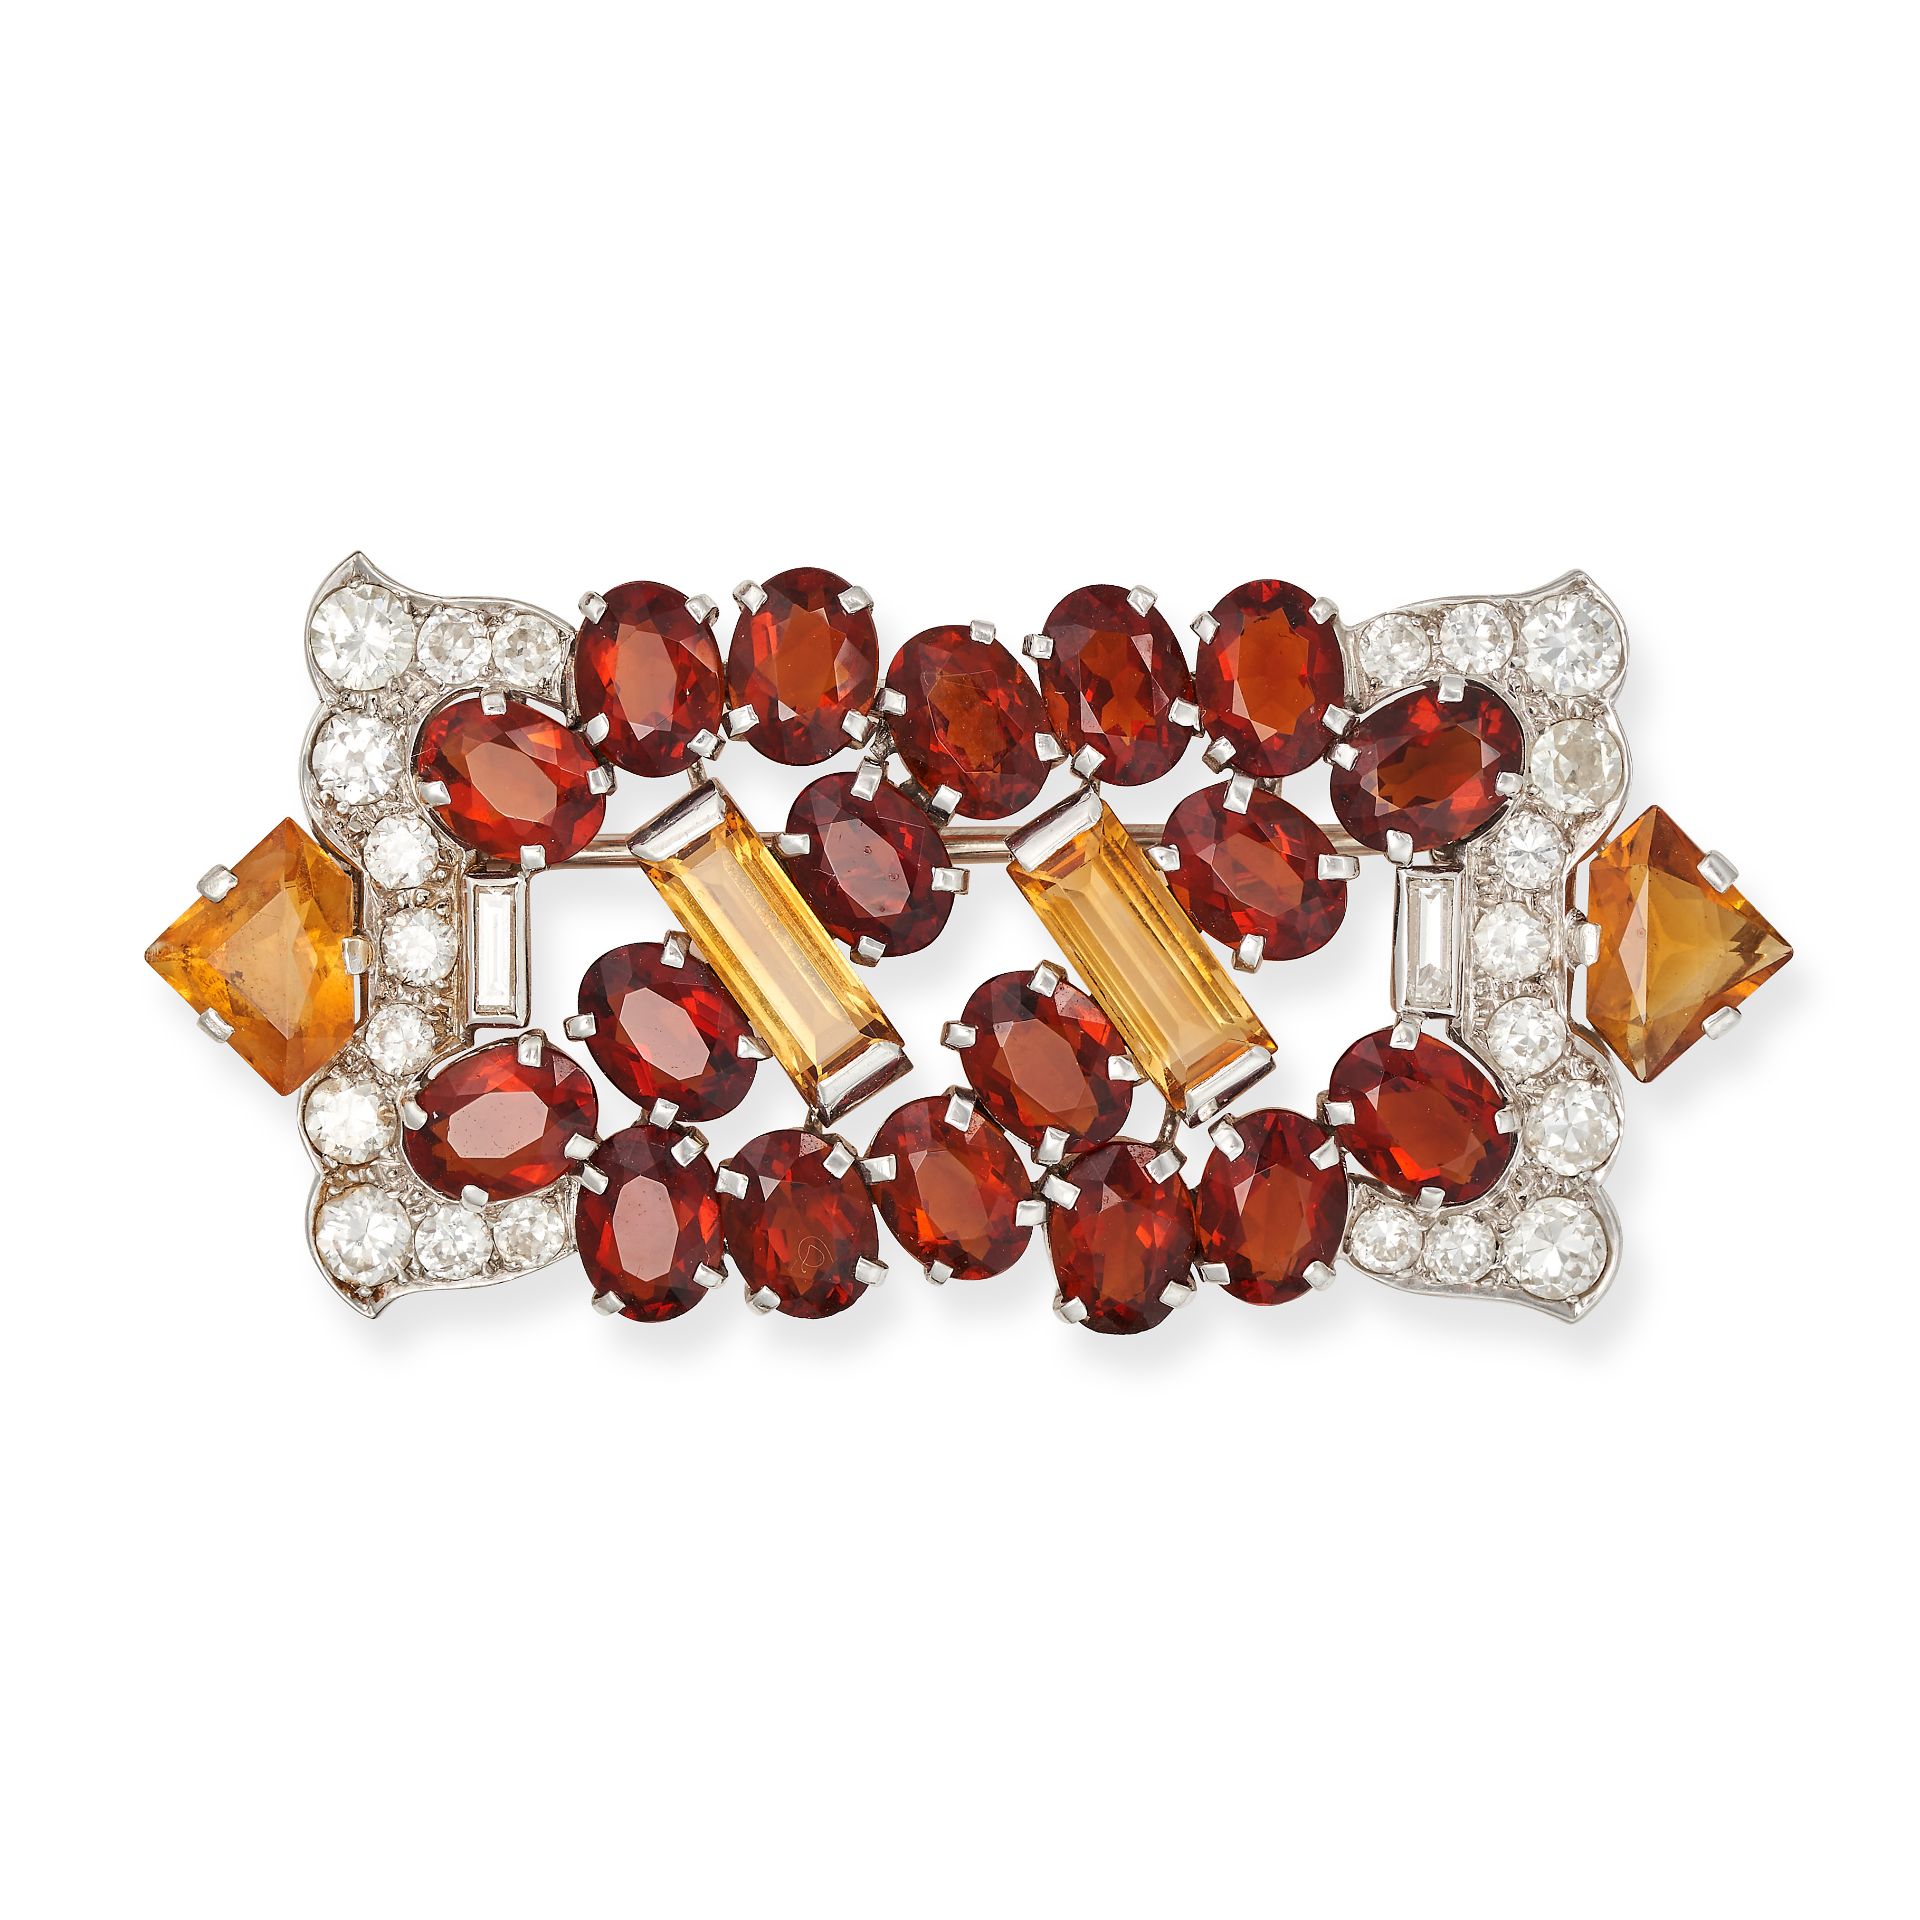 A CITRINE AND DIAMOND BROOCH in white gold, the geometric brooch set with two baguette cut citrin...